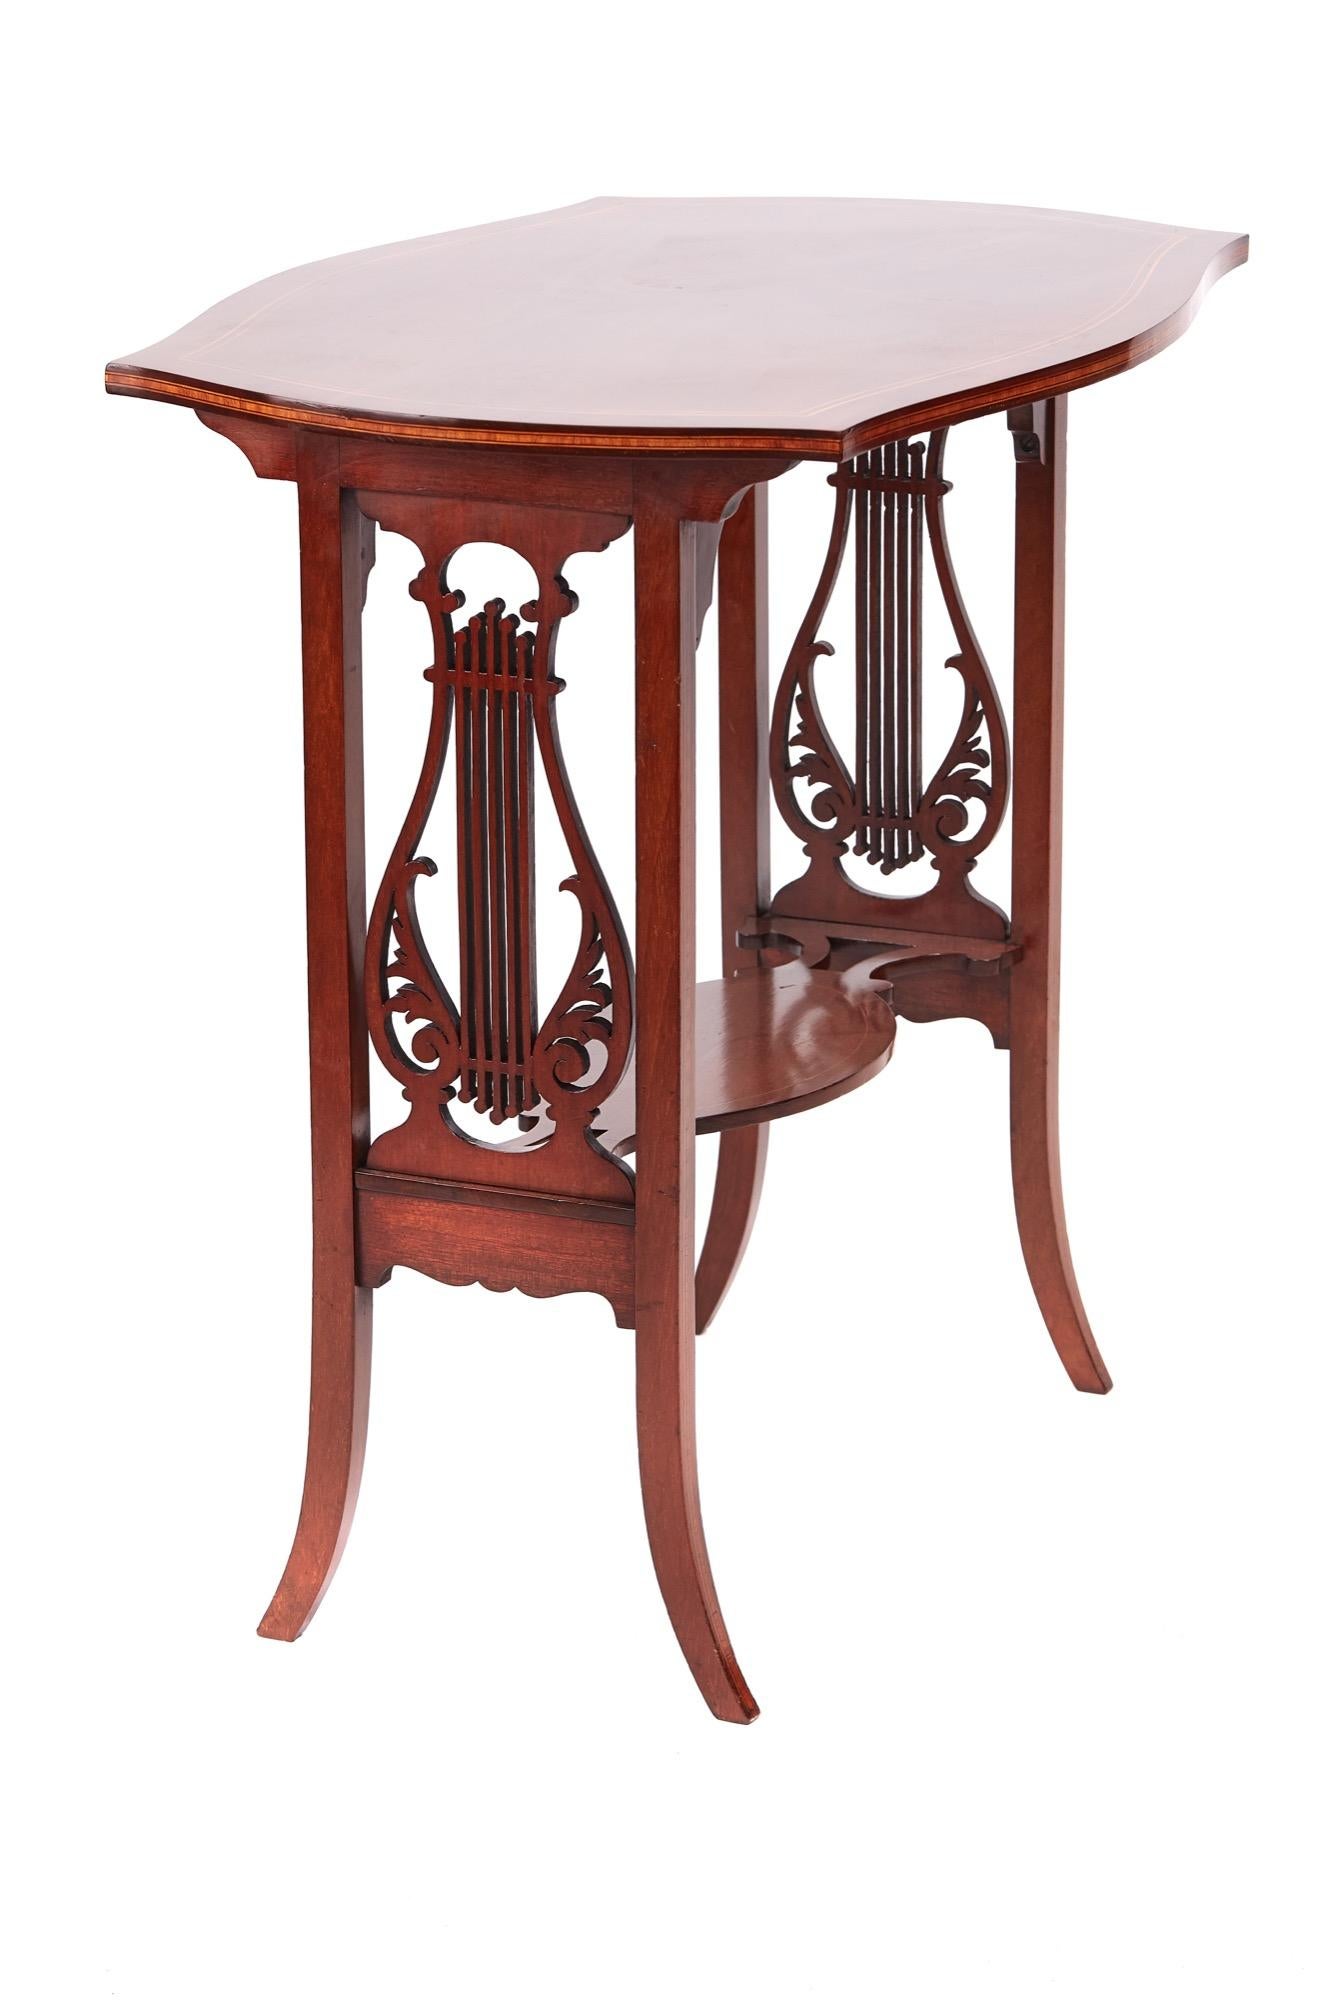 Quality Edwardian Mahogany Inlaid Lamp Table In Excellent Condition For Sale In Stutton, GB